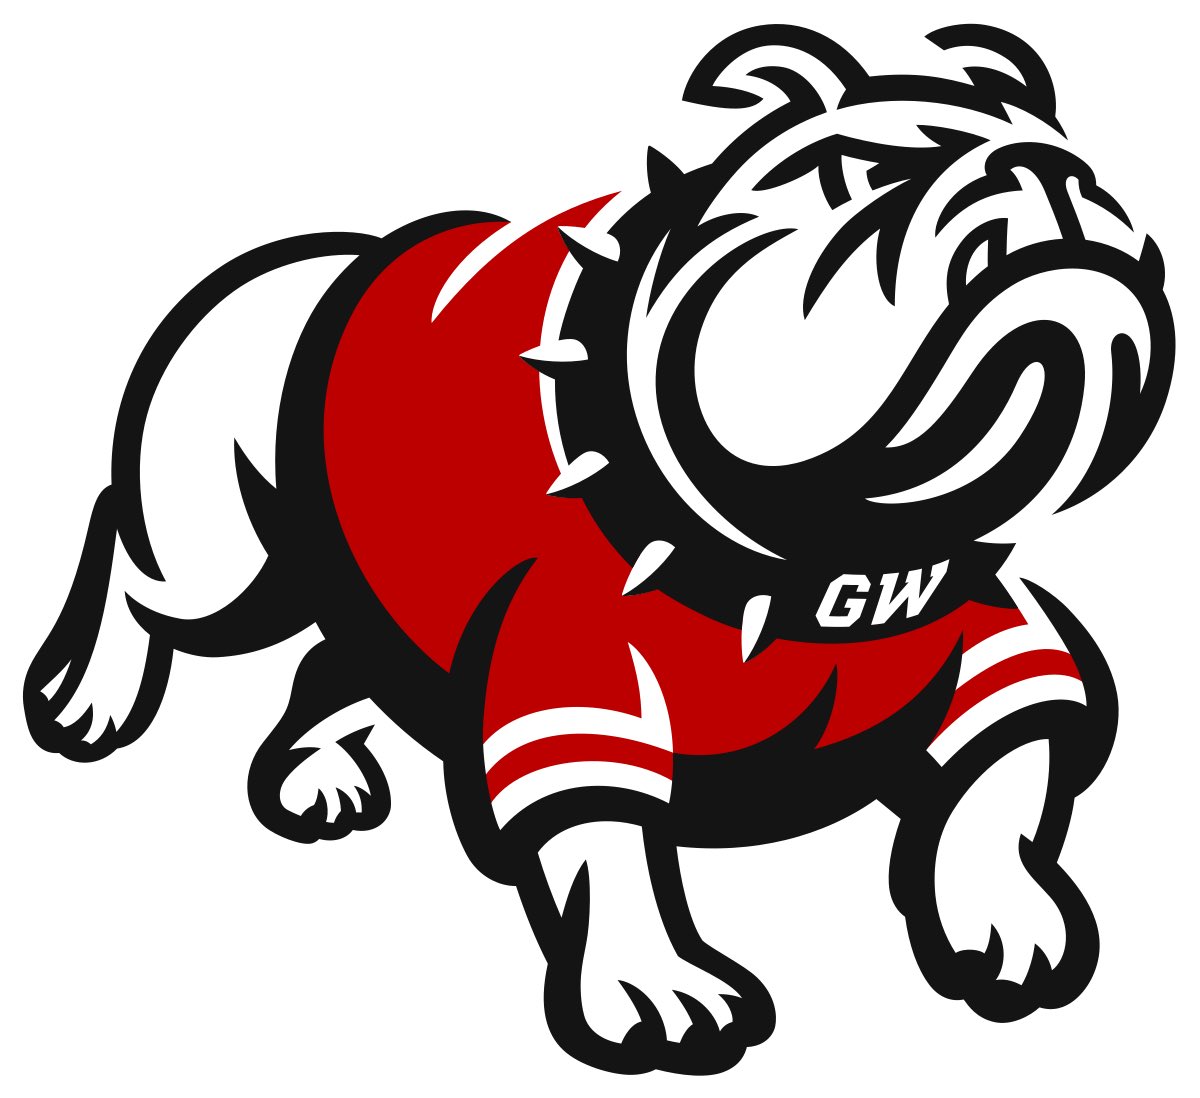 Blessed to receive an offer from Gardner Webb University! @RealdealTY @tech813coach